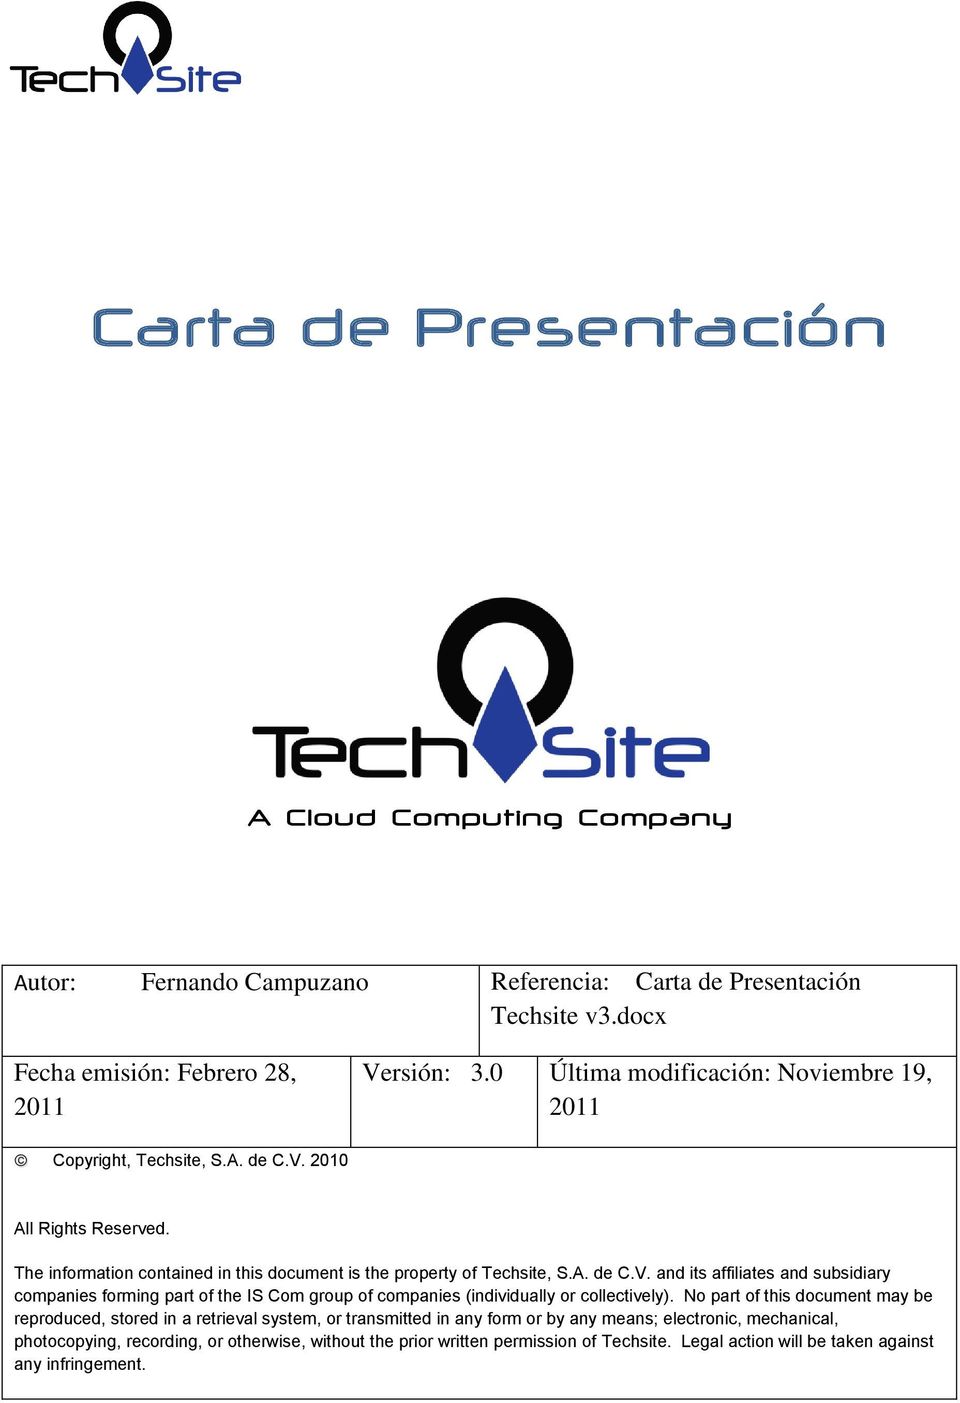 2010 All Rights Reserved. The information contained in this document is the property of Techsite, S.A. de C.V.